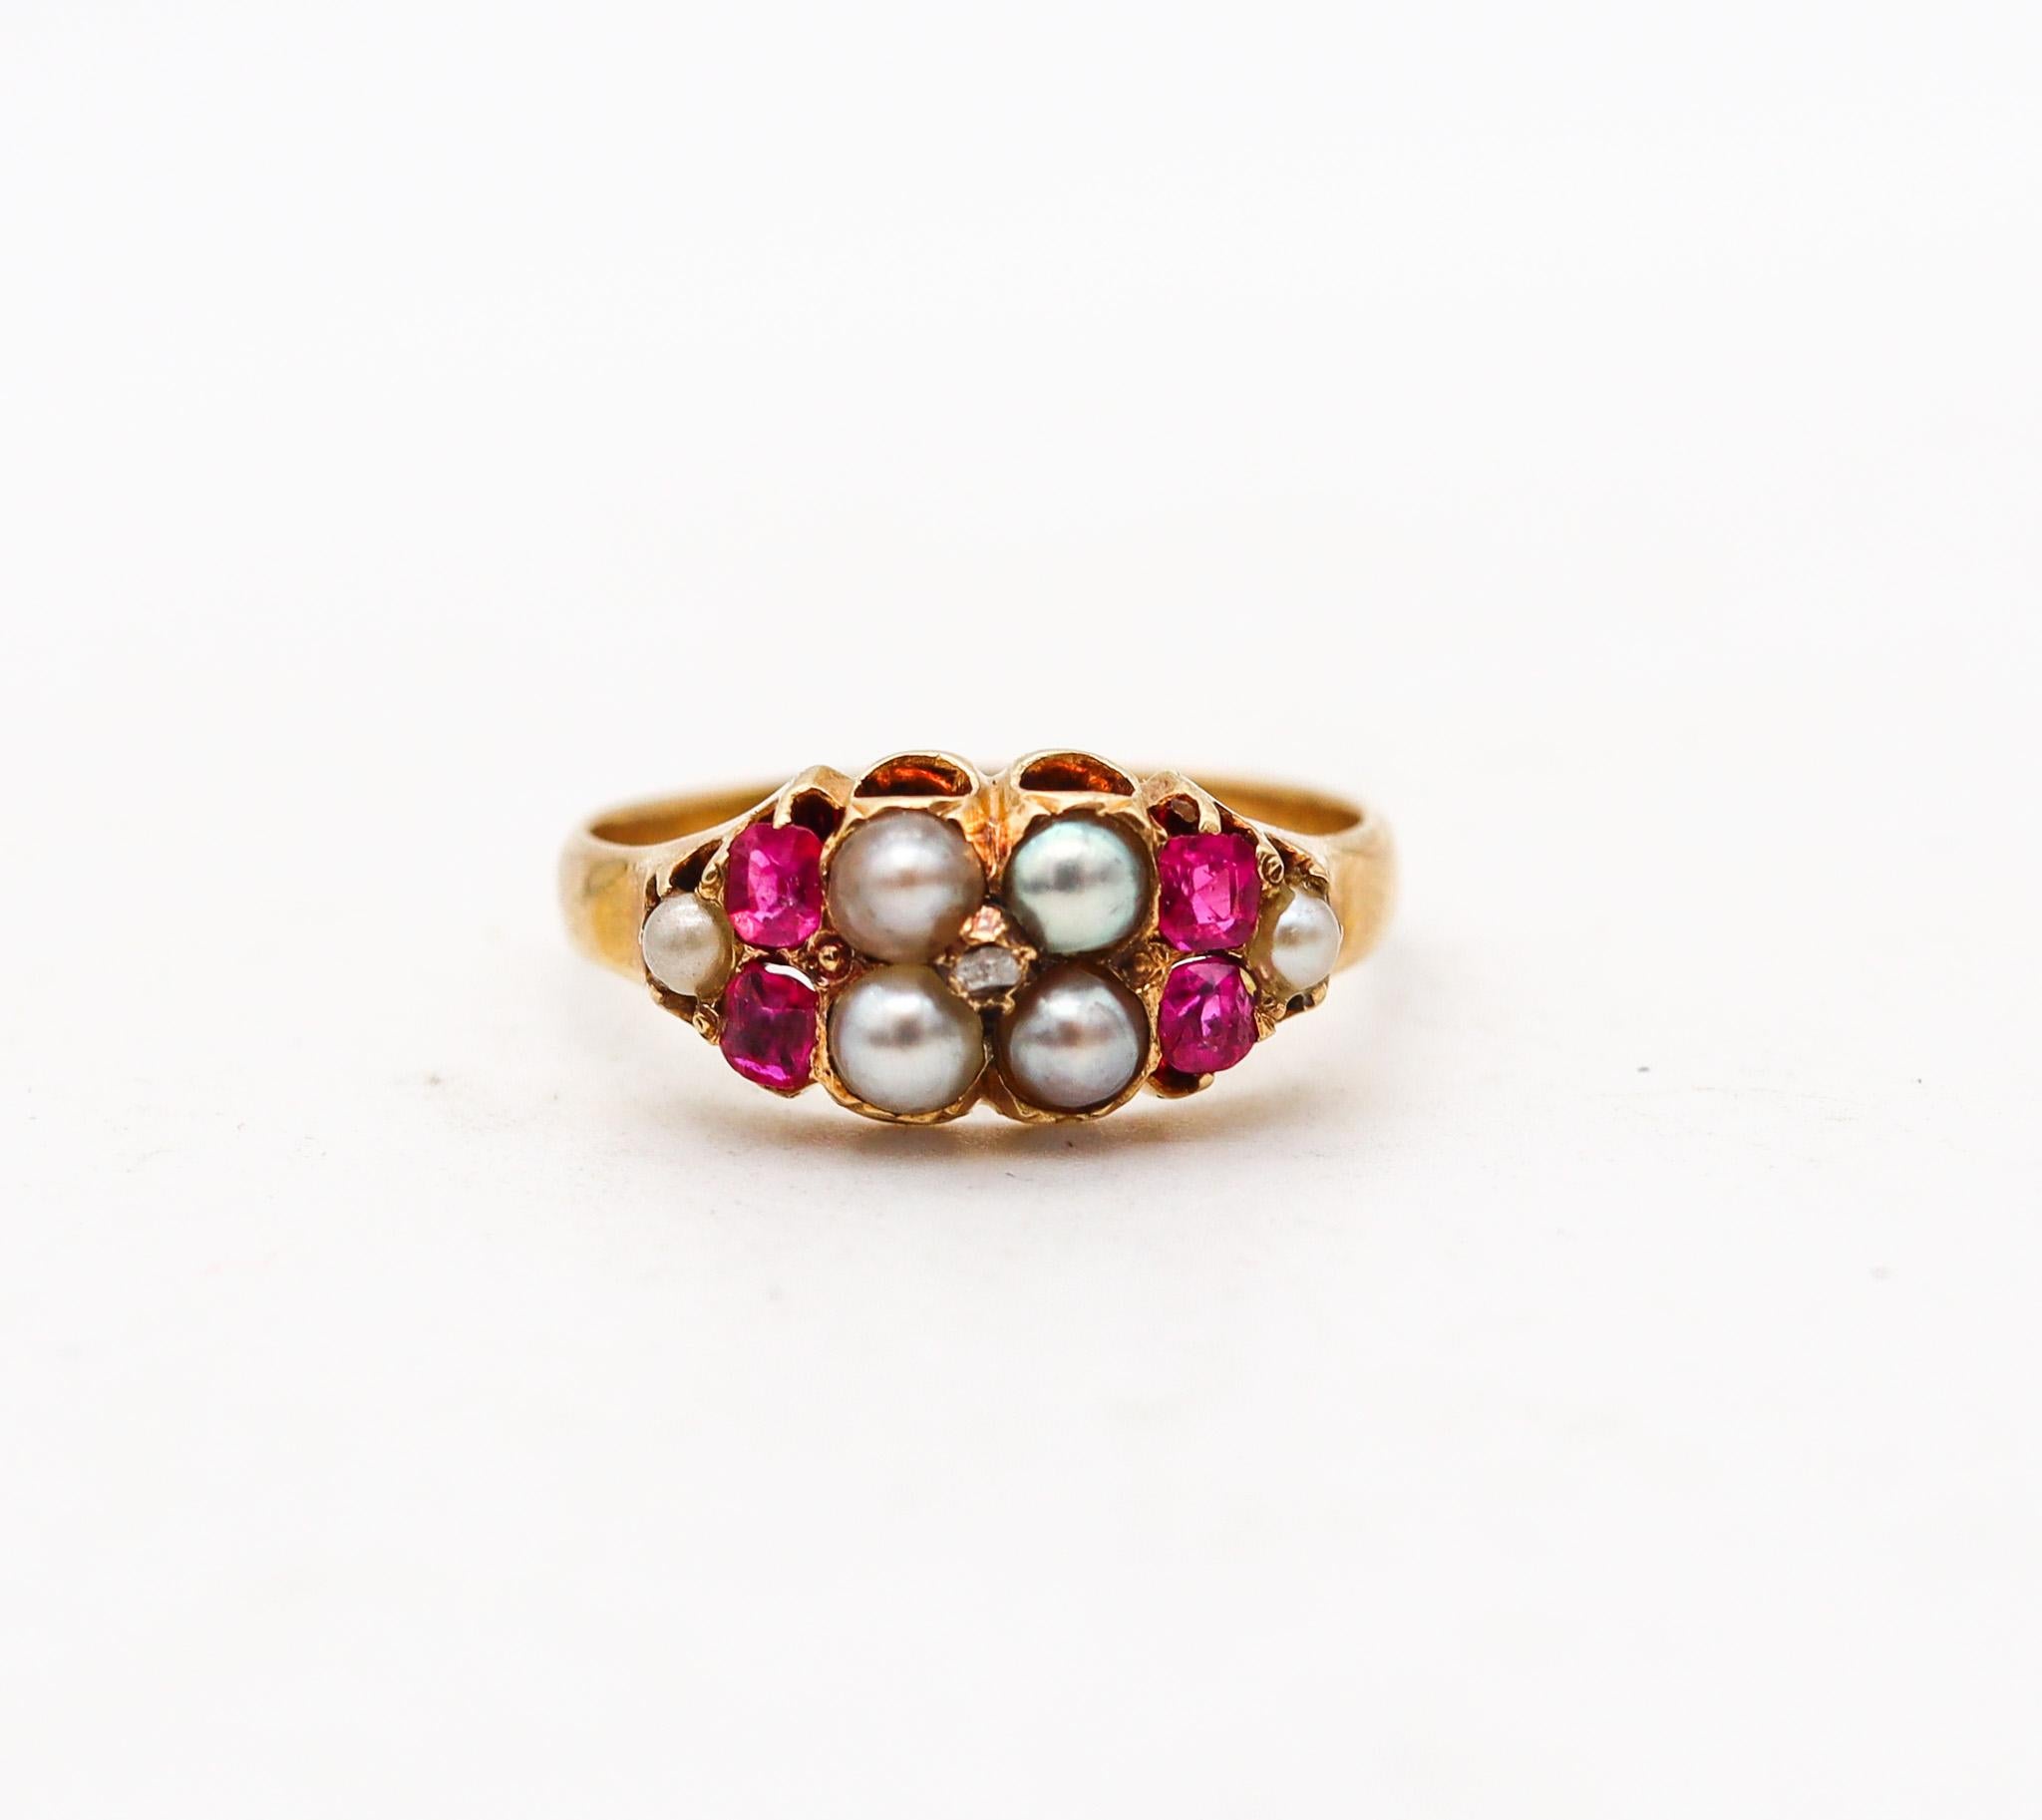 An European Victorian ring with rubies and pearls.

Beautiful and delicate antique ring, created in Europe back in the 19th century, circa 1880. This ring is most probably British and has been crafted in solid yellow gold of 18 karats with high